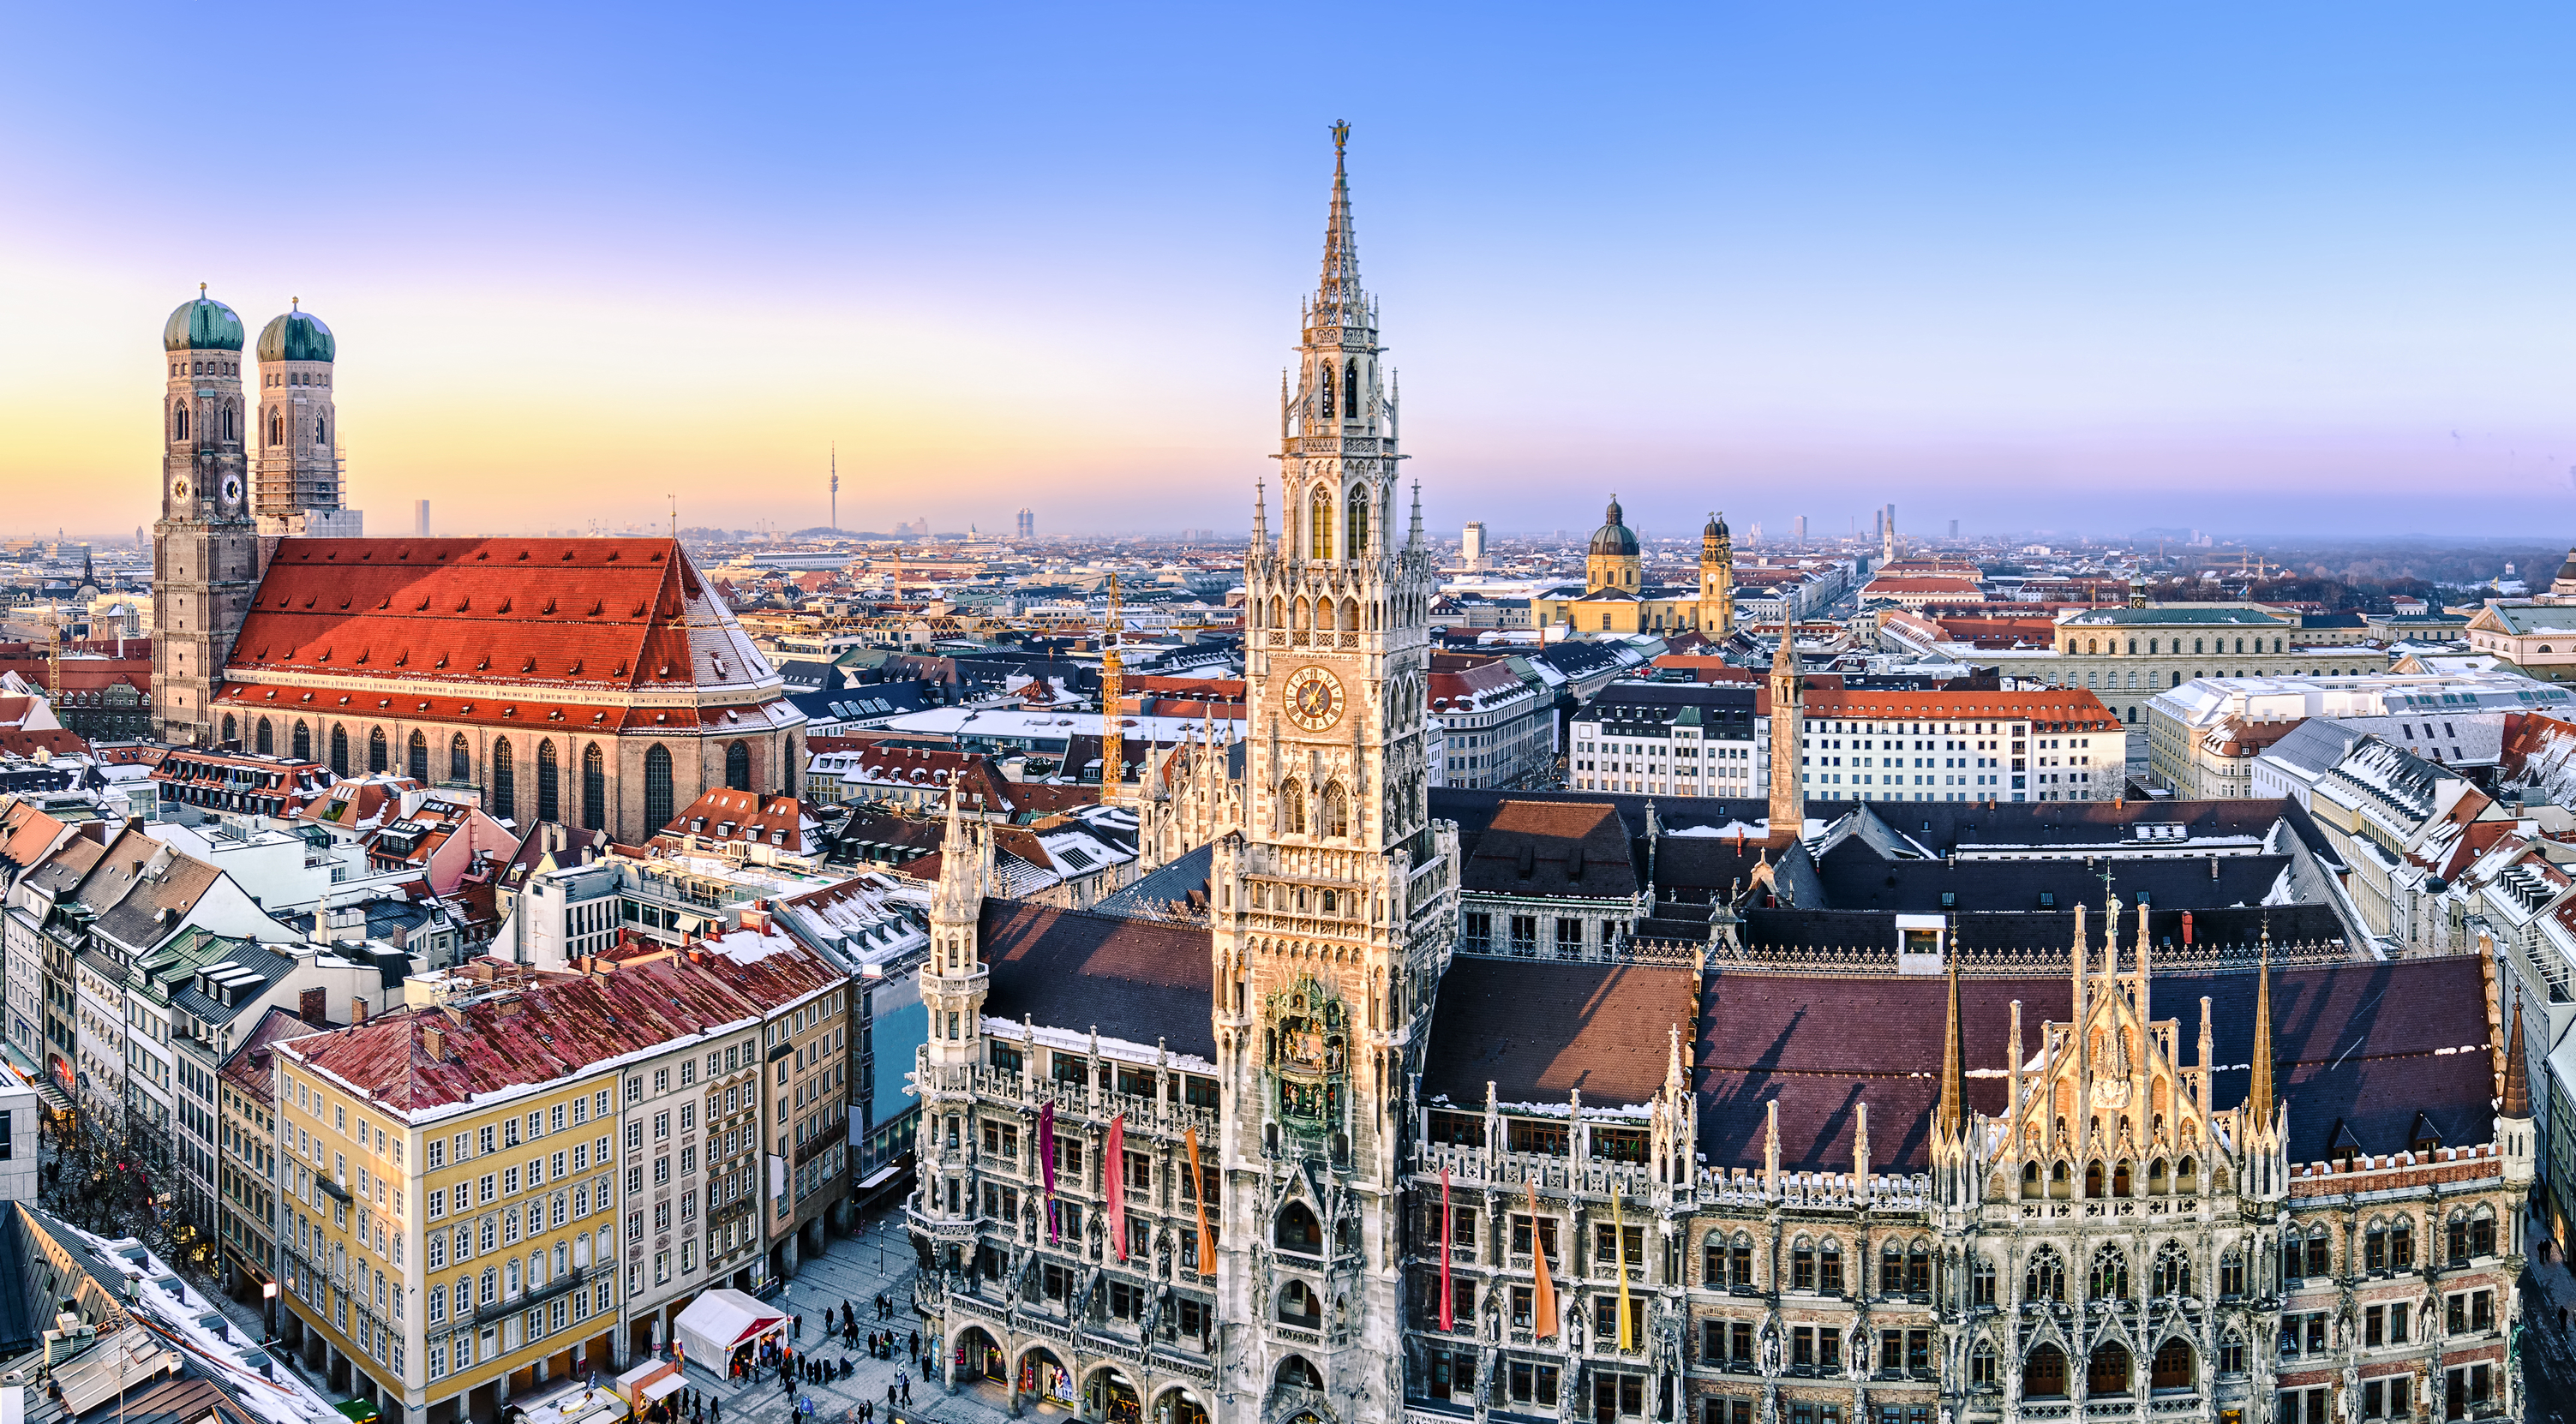 8-night Switzerland, Germany & Austria escape with flights and hotels from $1,120